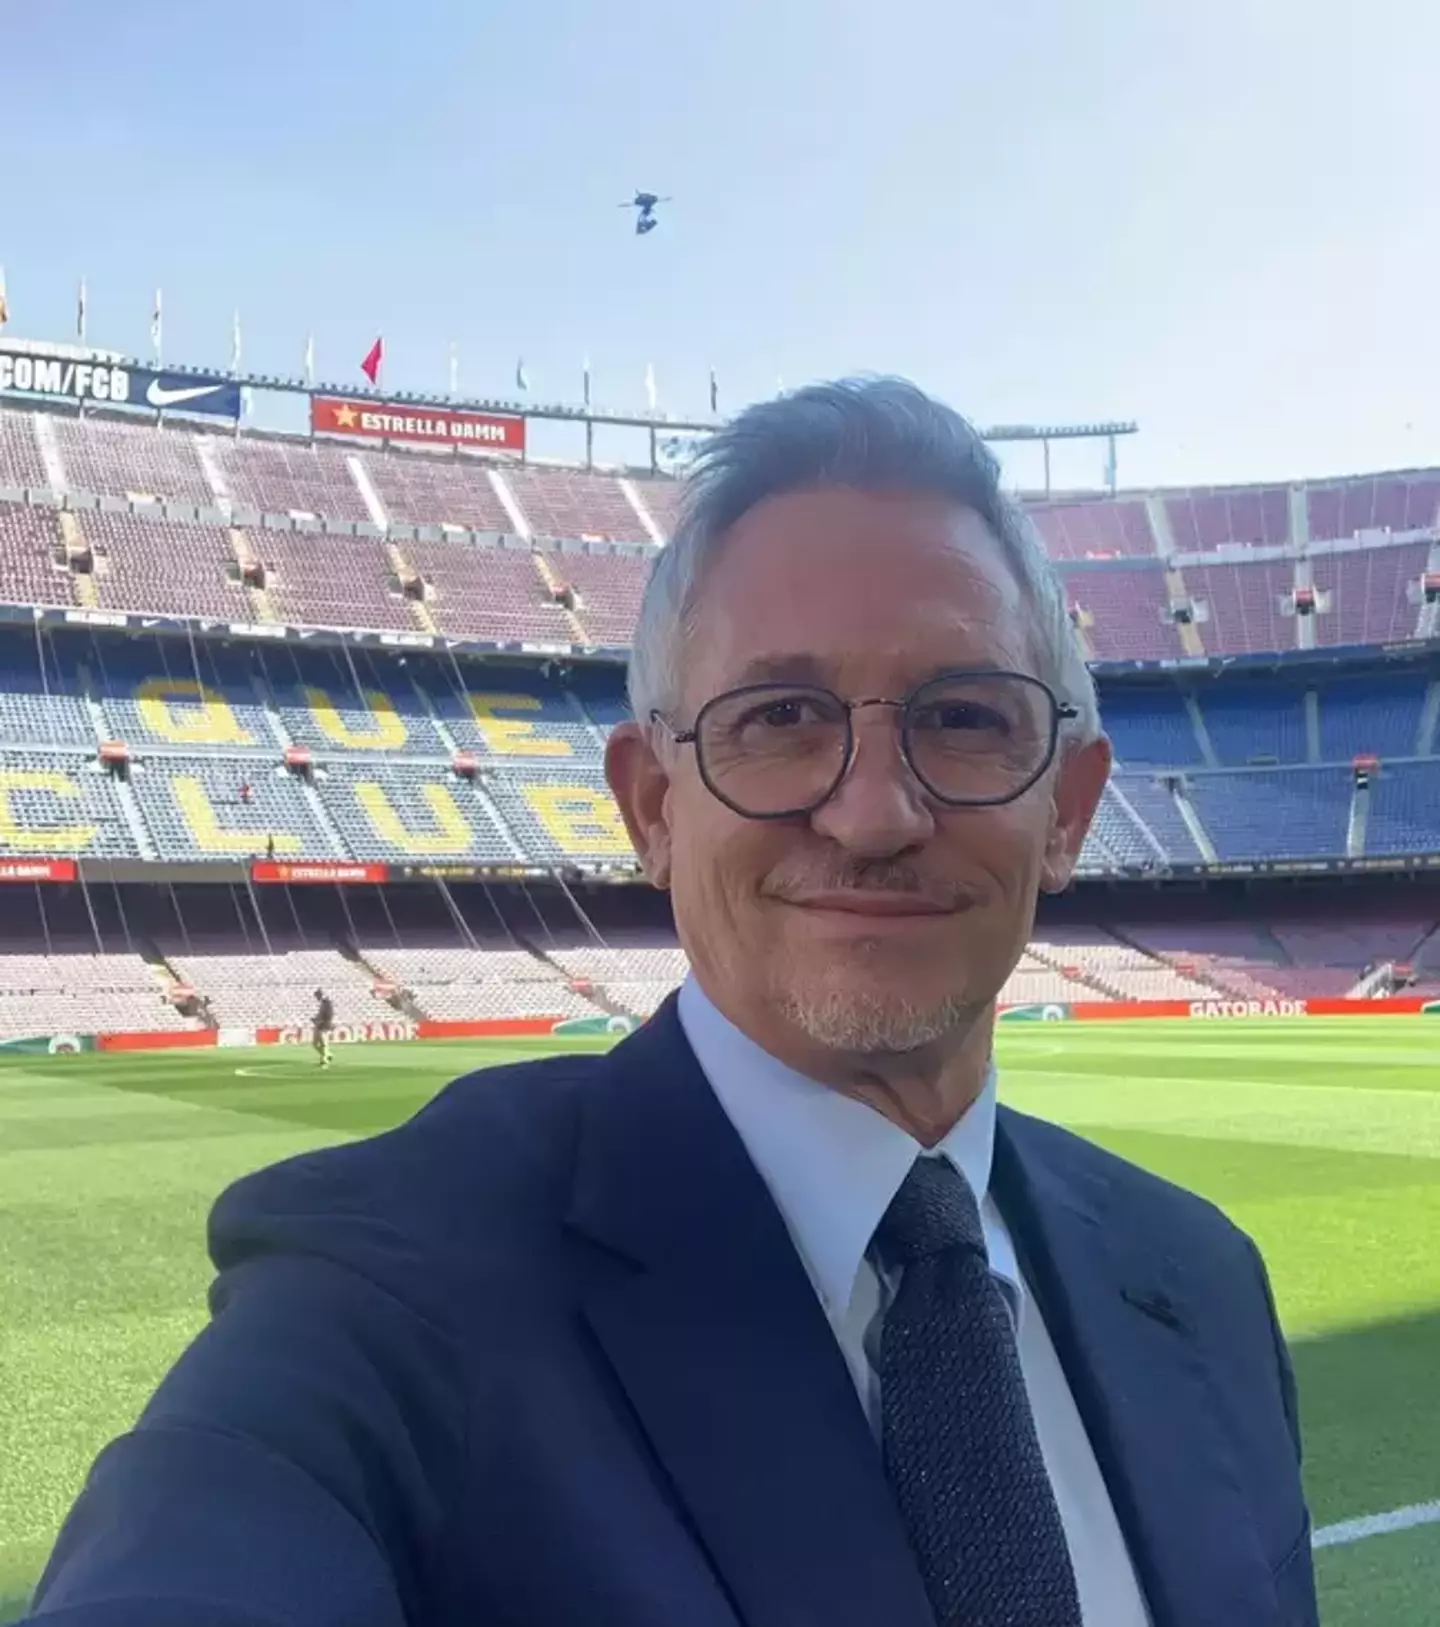 Gary Lineker is set to return to presenting sport on the BBC.